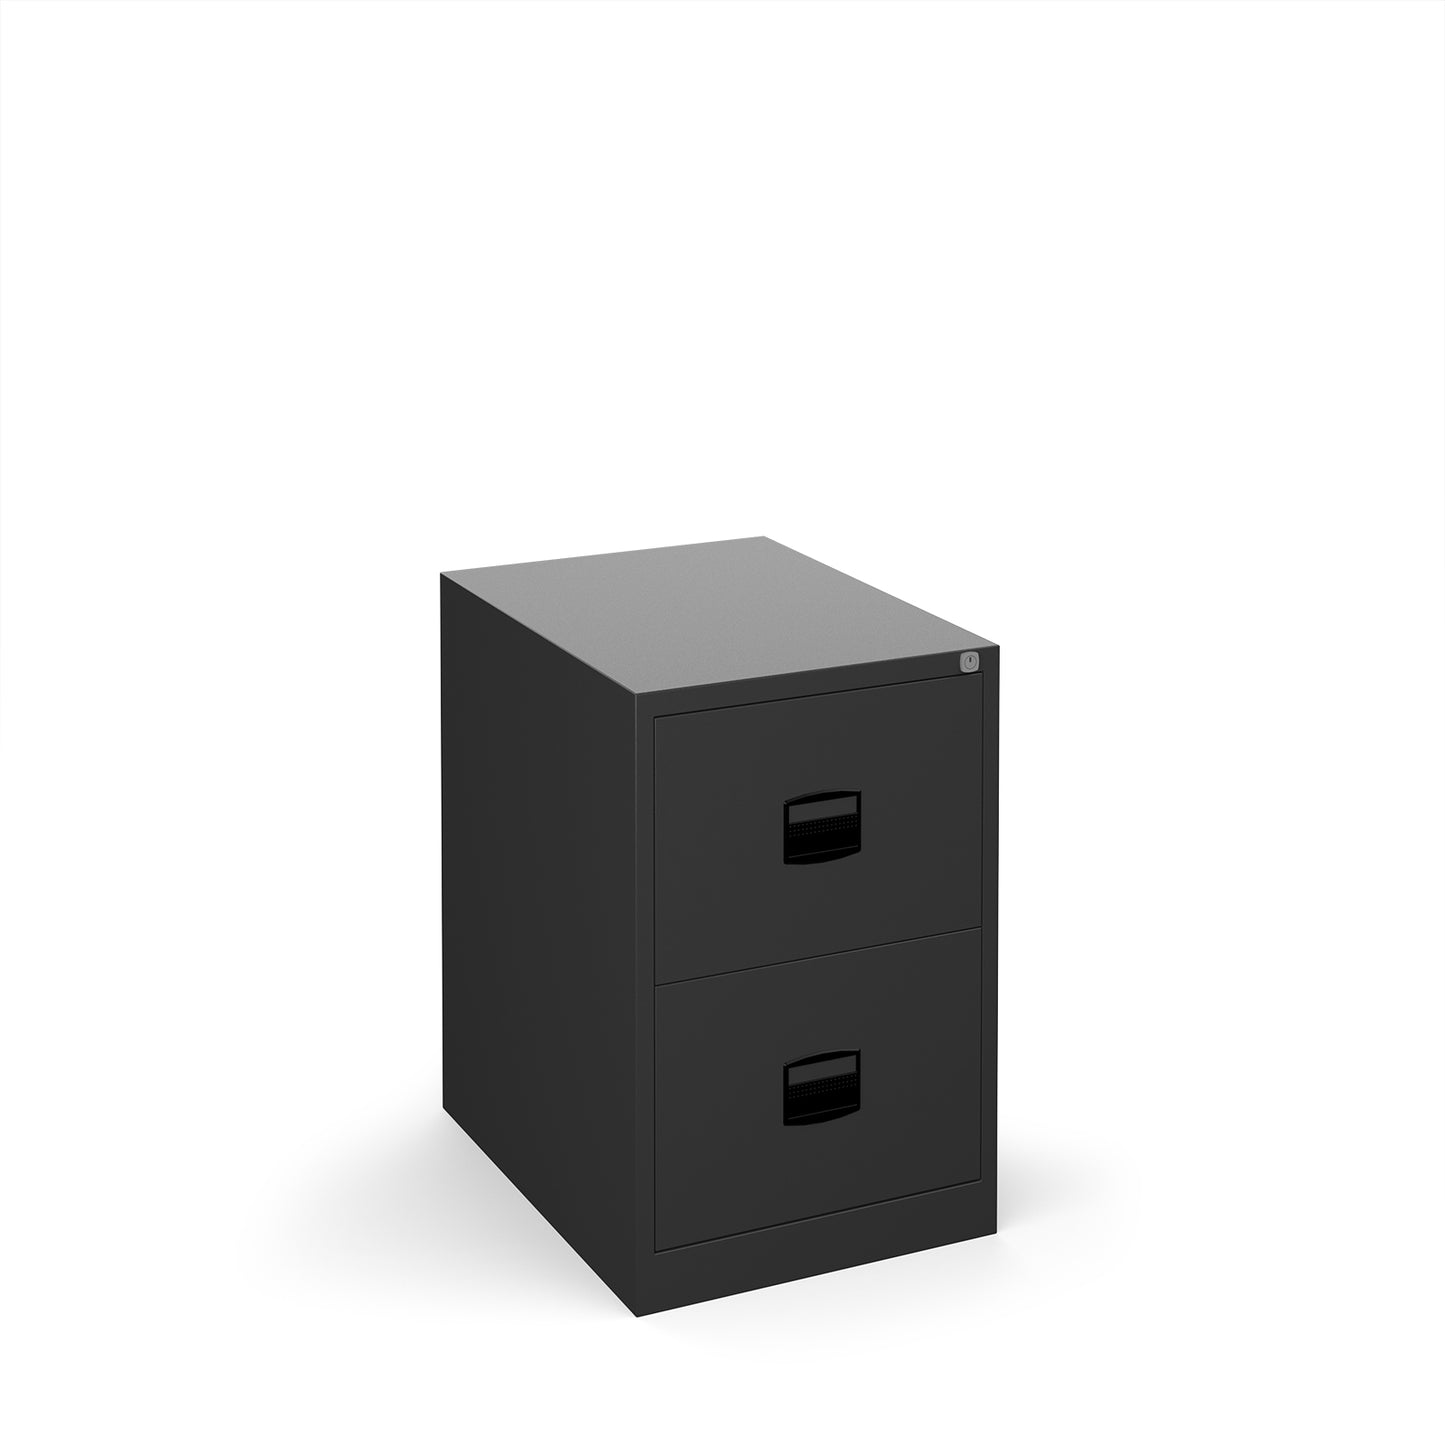 Steel Contract Filing Cabinet - 4 Drawer - Black